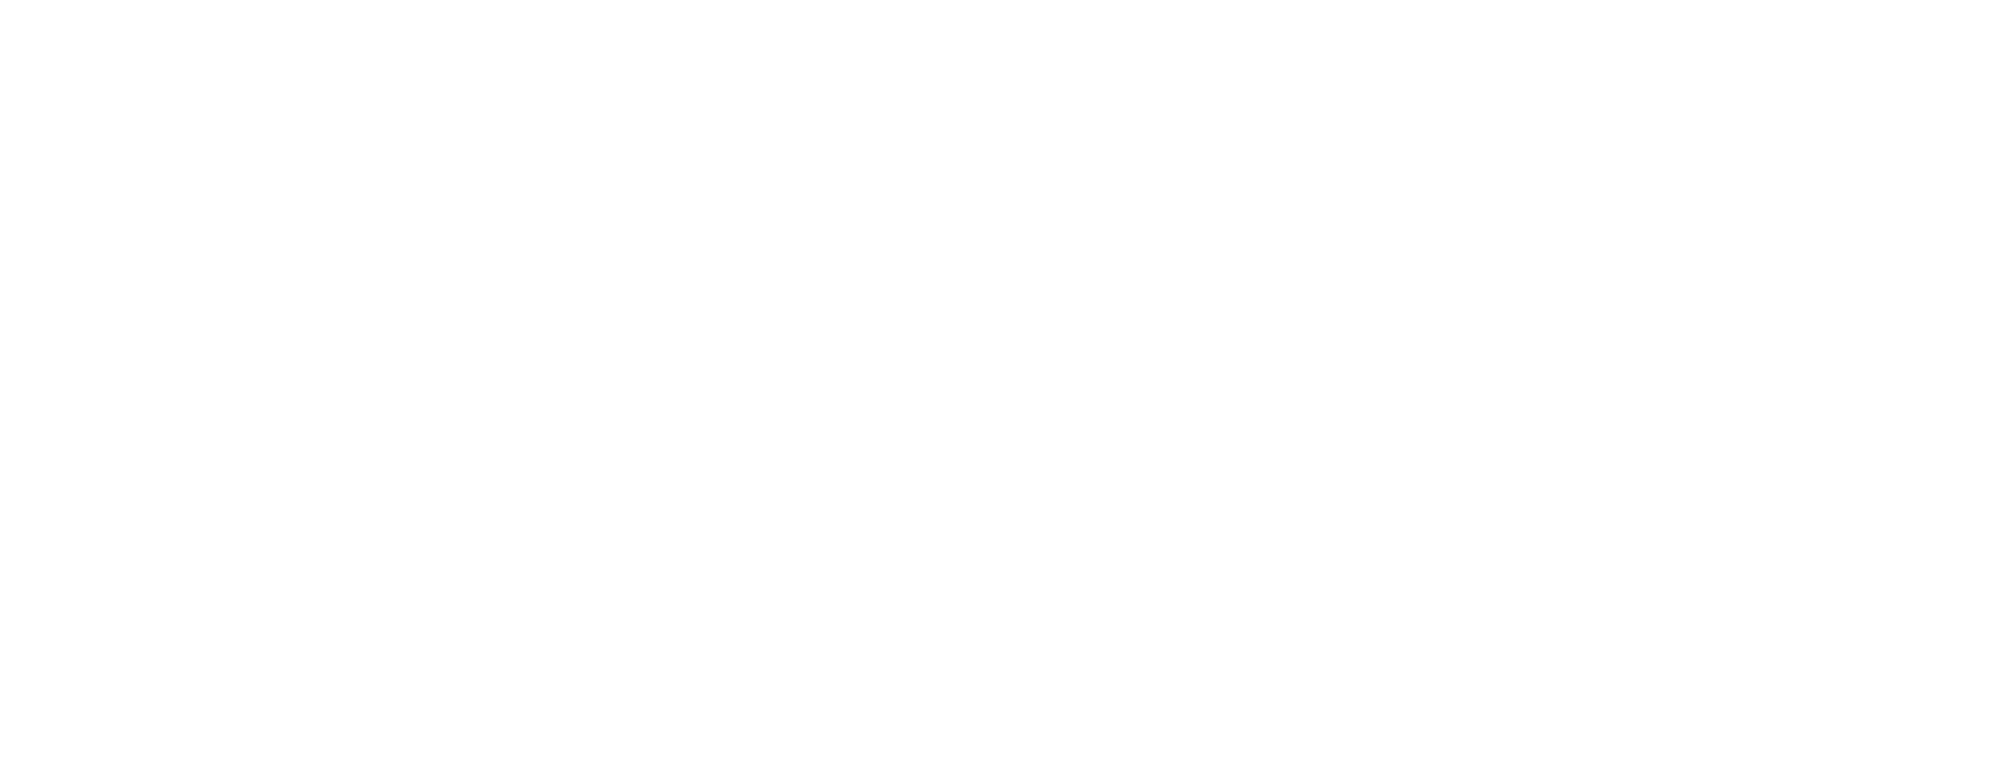 OpenFF Toolkit 0.11.0+0.g89a33ea4.dirty documentation logo